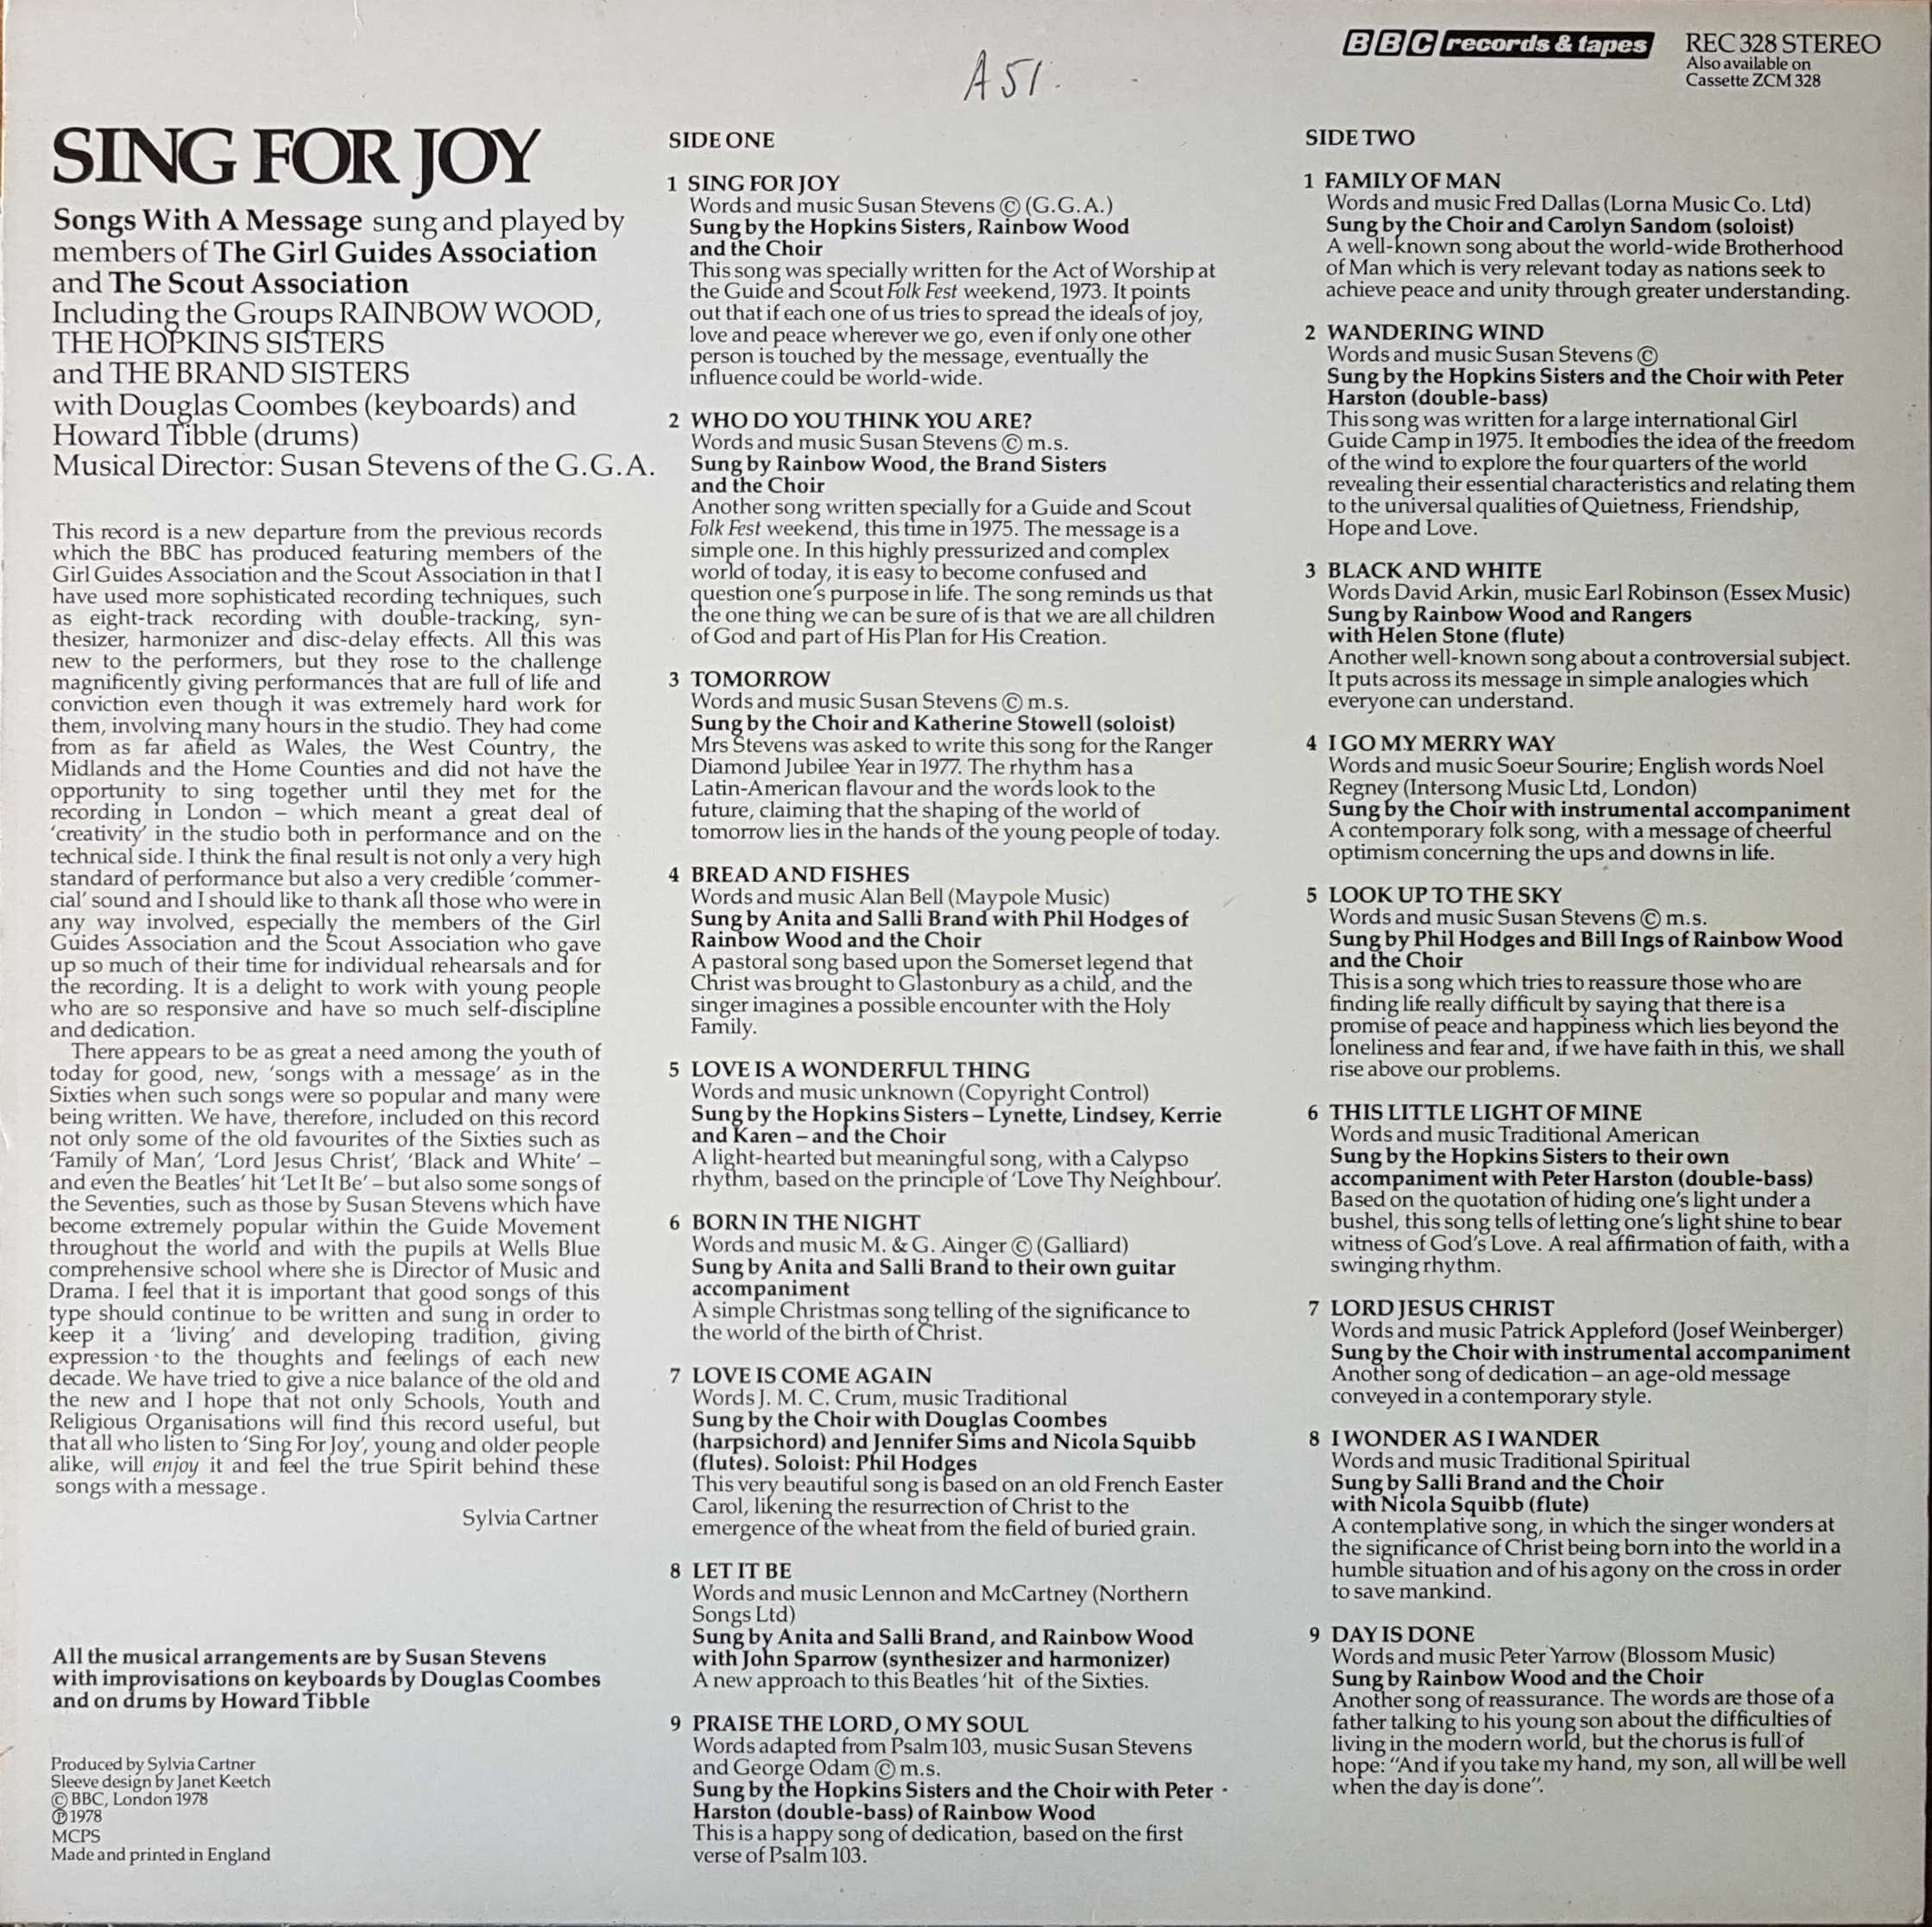 Picture of REC 328 Sing for joy by artist Various from the BBC records and Tapes library